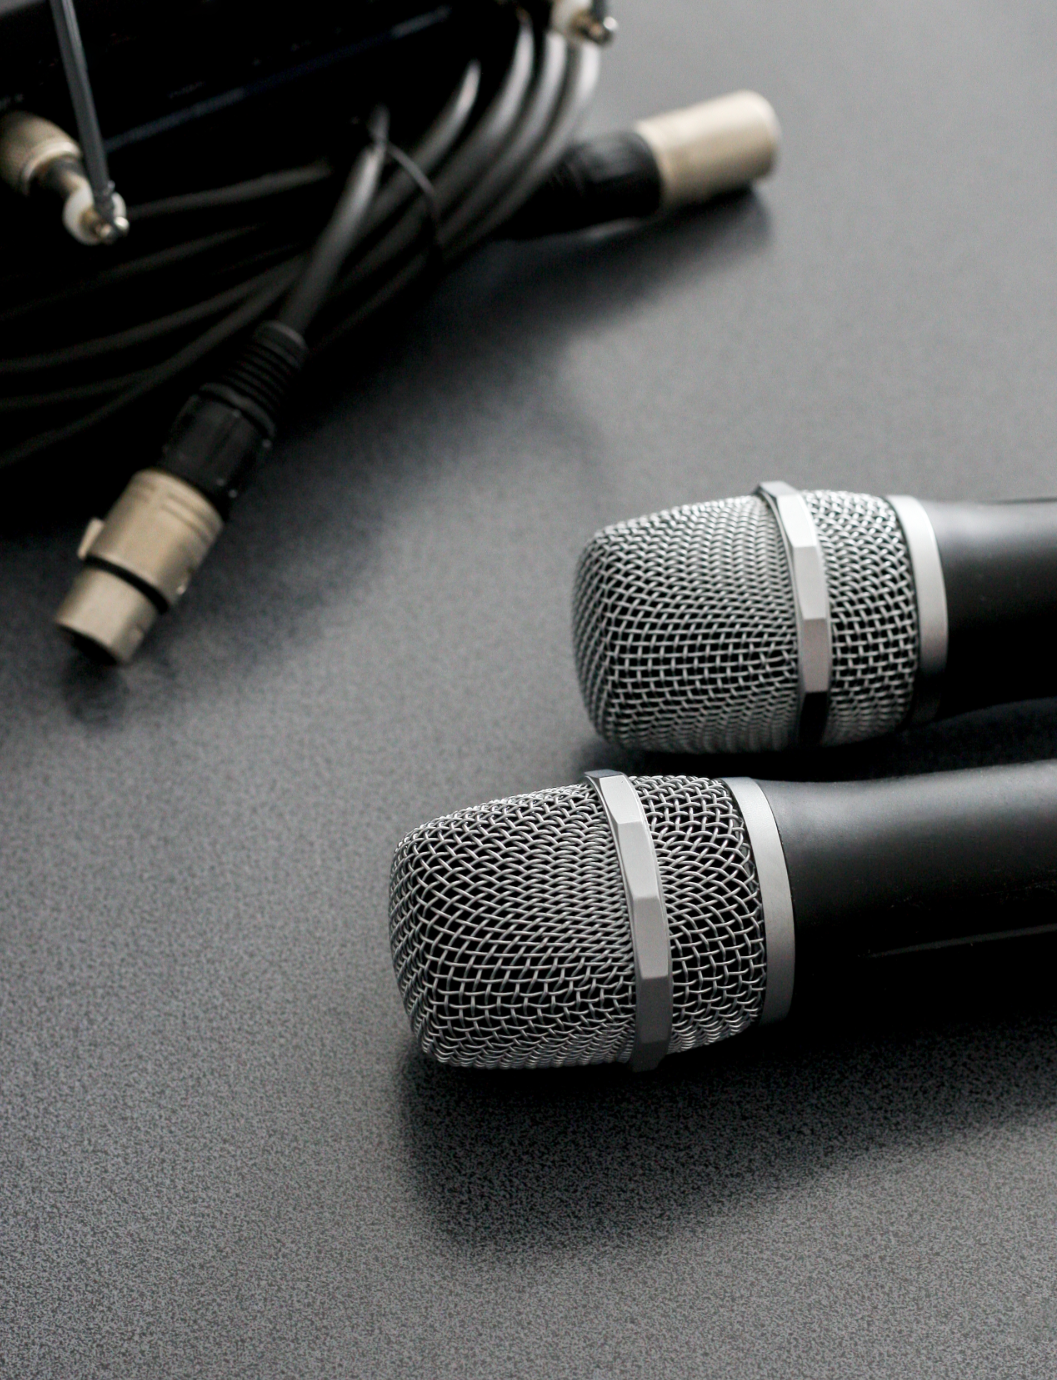 The Advantages of Wireless Microphone Systems